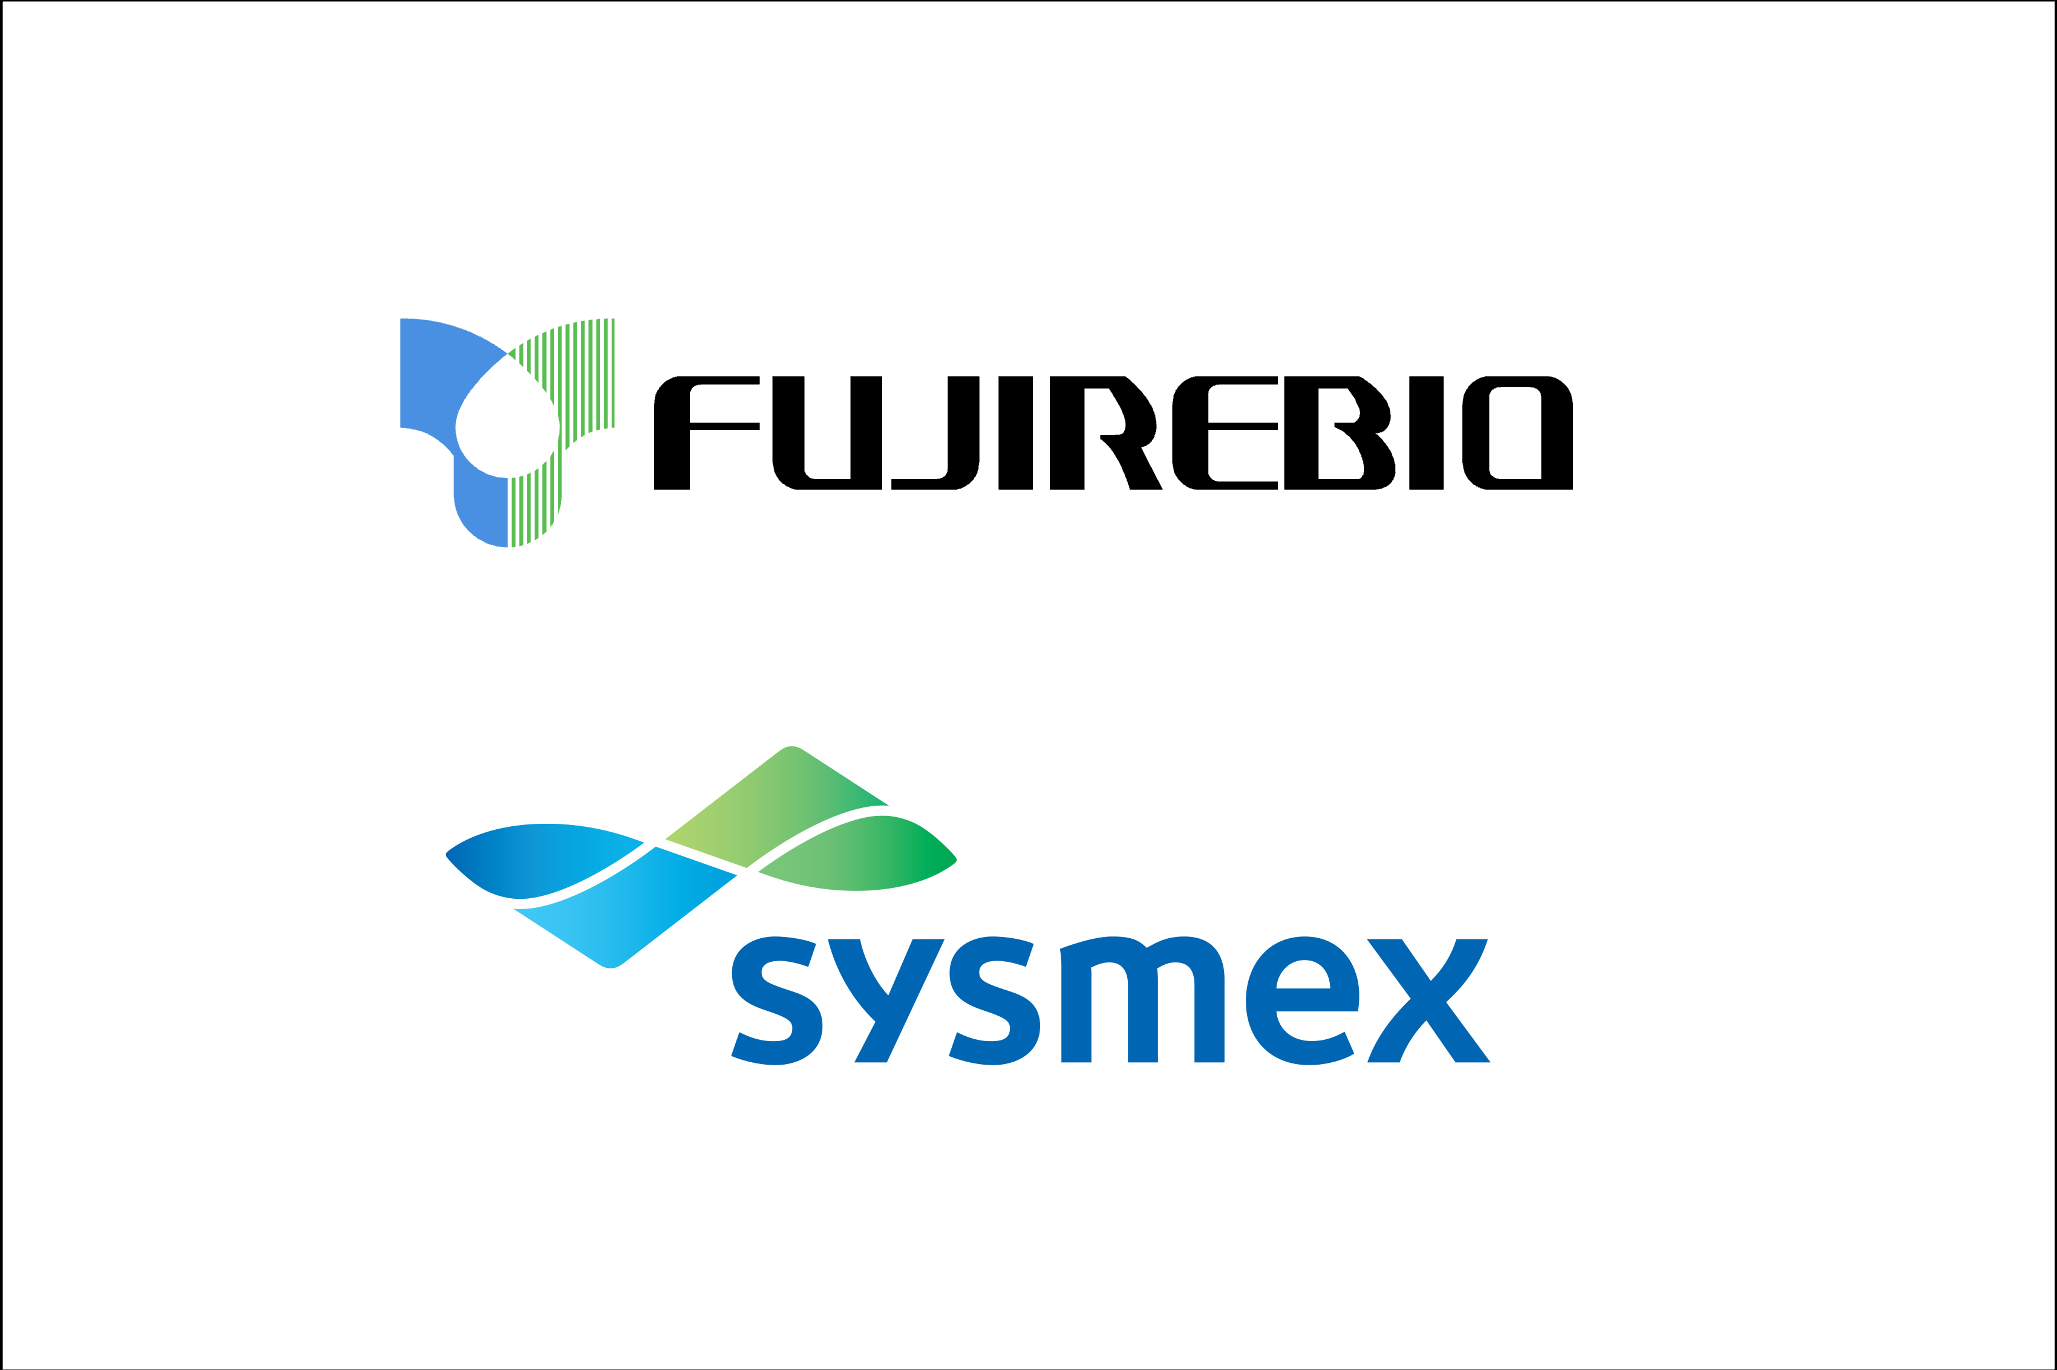 Fujirebio and Sysmex sign agreement for the supply of reagent raw materials in the field of Immunoassay